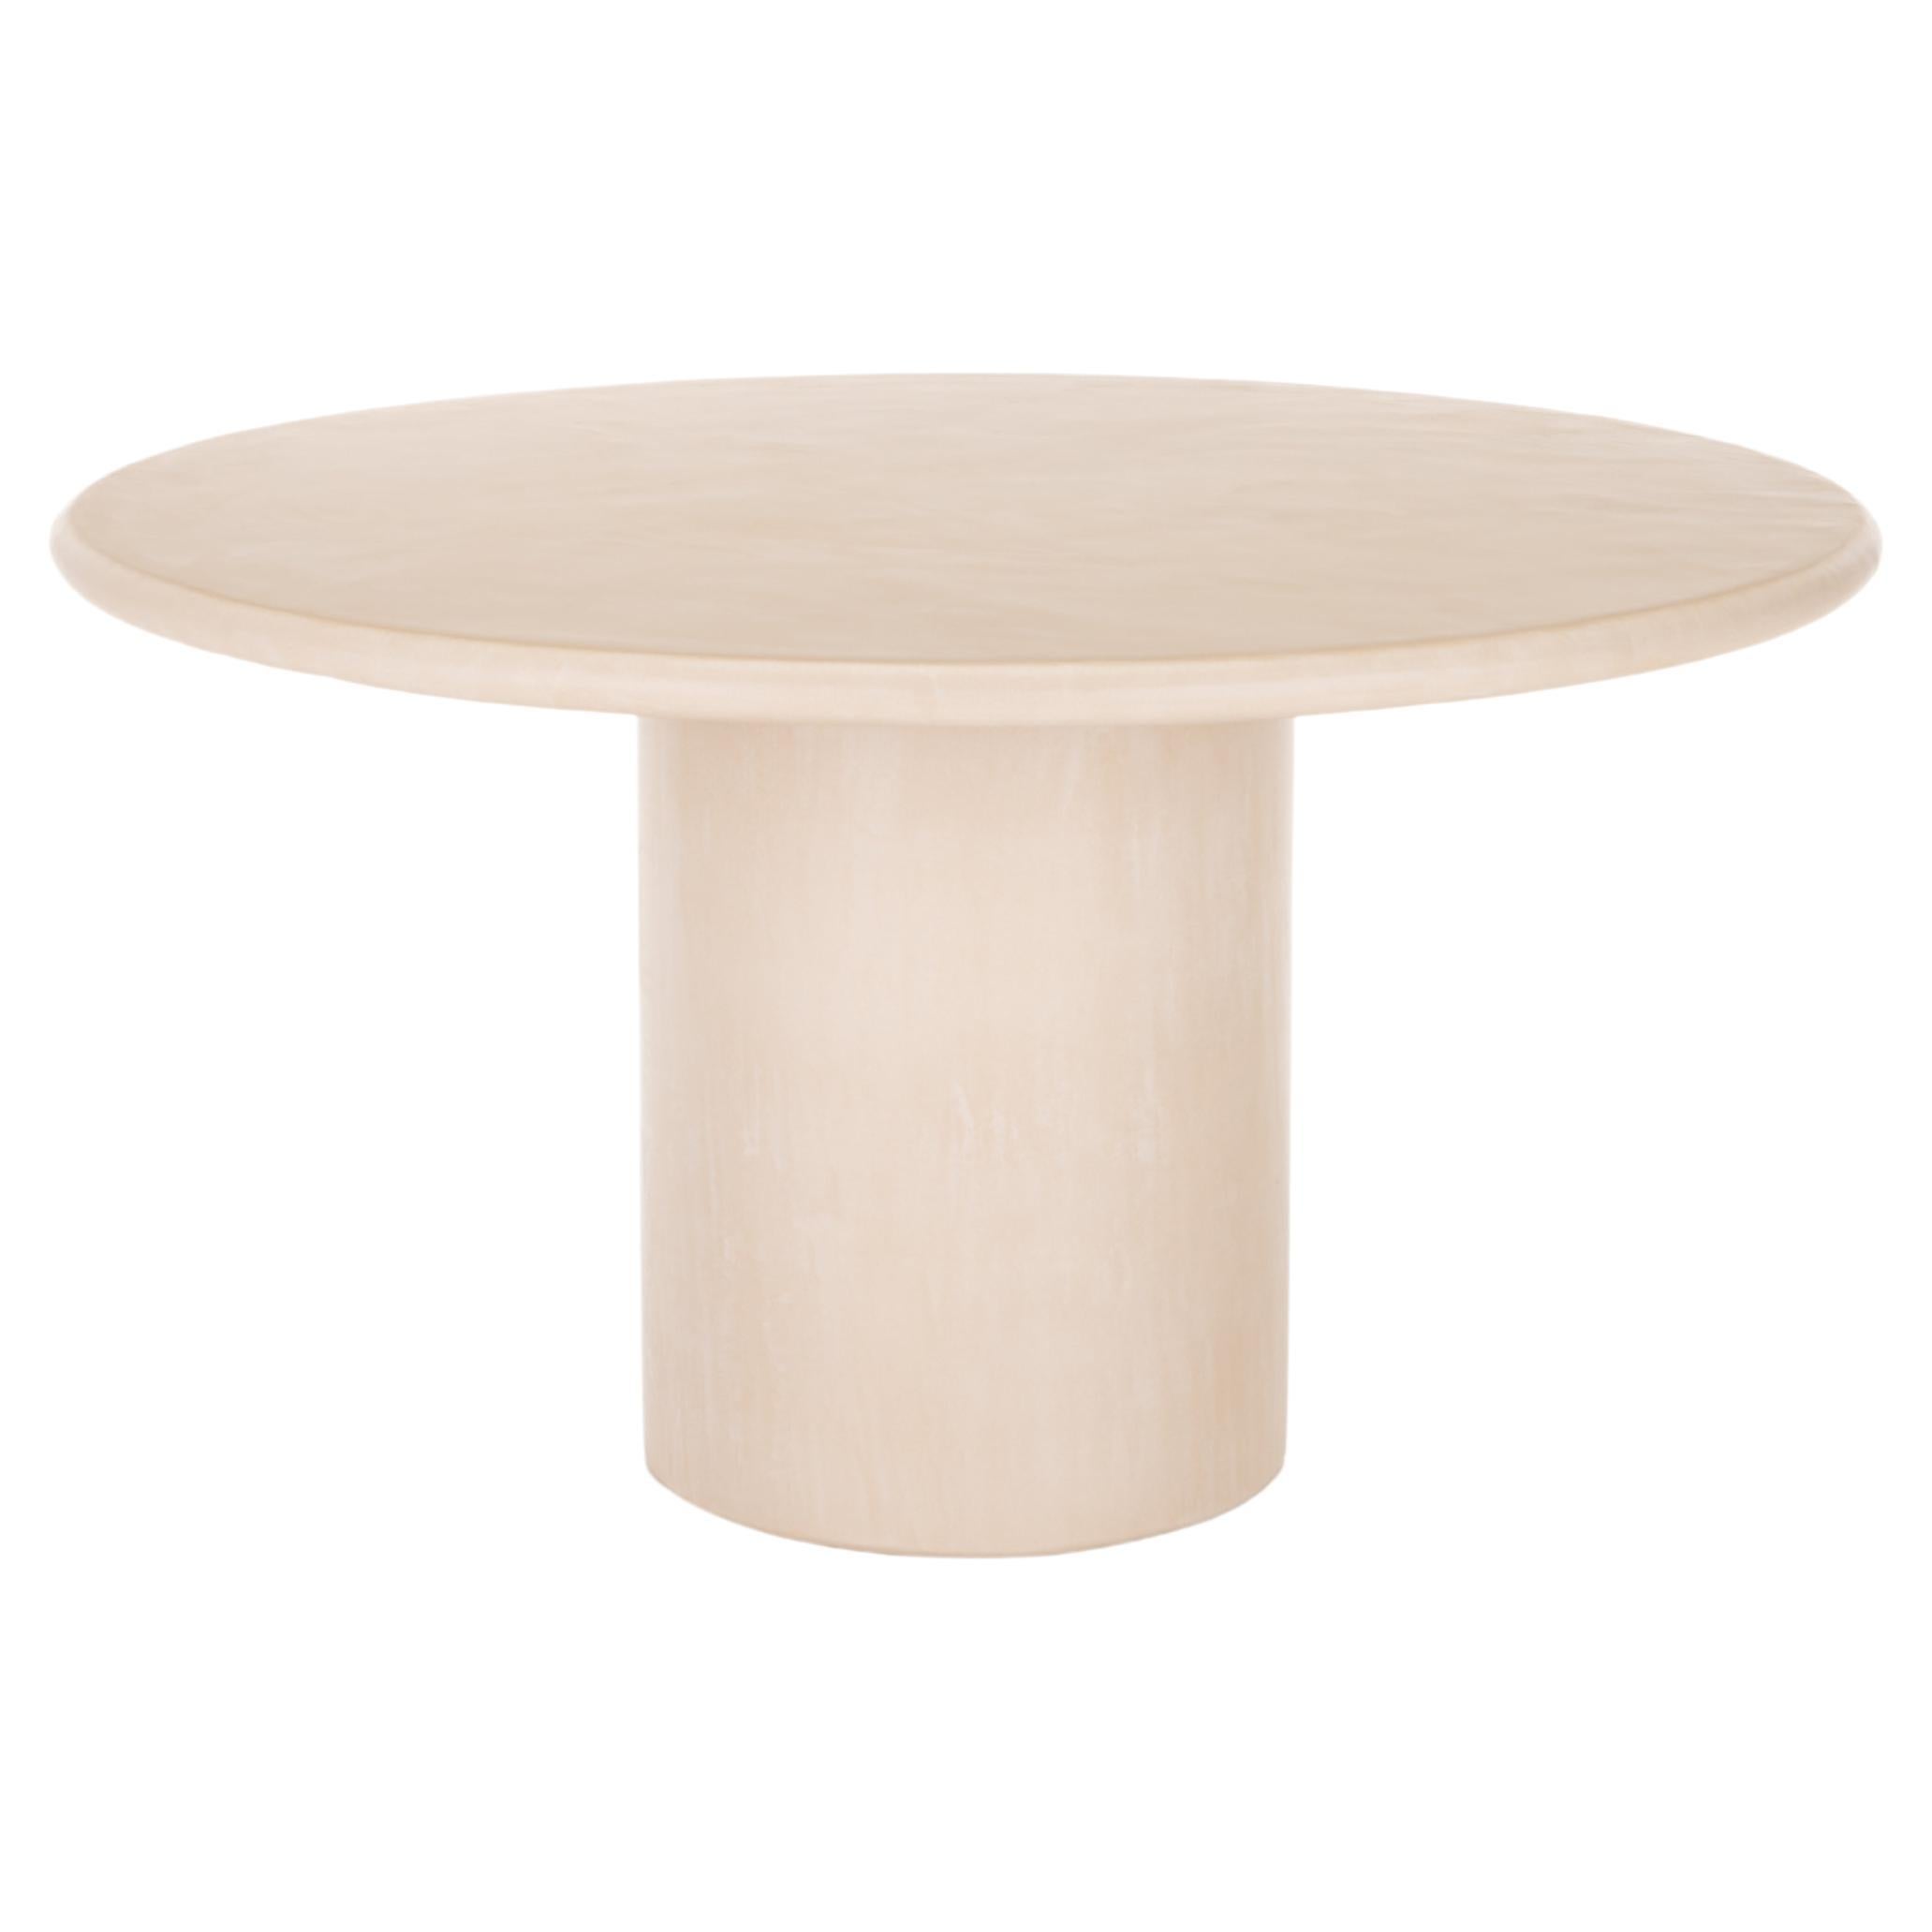 Round Natural Plaster Dining Table "Column" 120 by Isabelle Beaumont For Sale